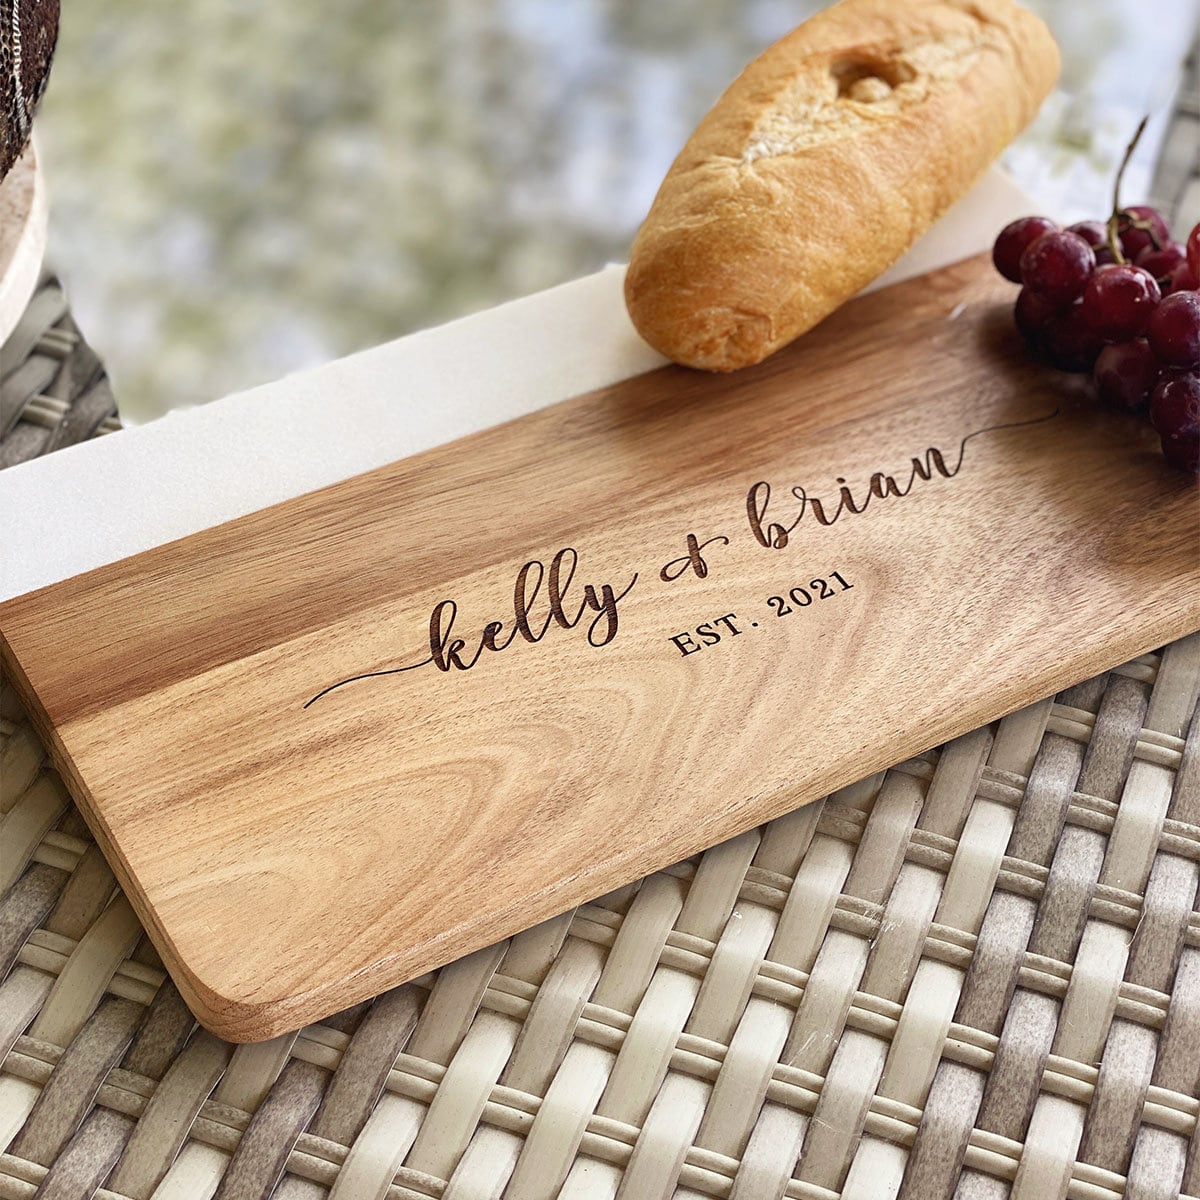 Personalized Marble Wood Cutting Board, Cheese Board, Charcuterie Board, Anniversary Gift, Wedding Gift, Housewarming Gift, Serving Board